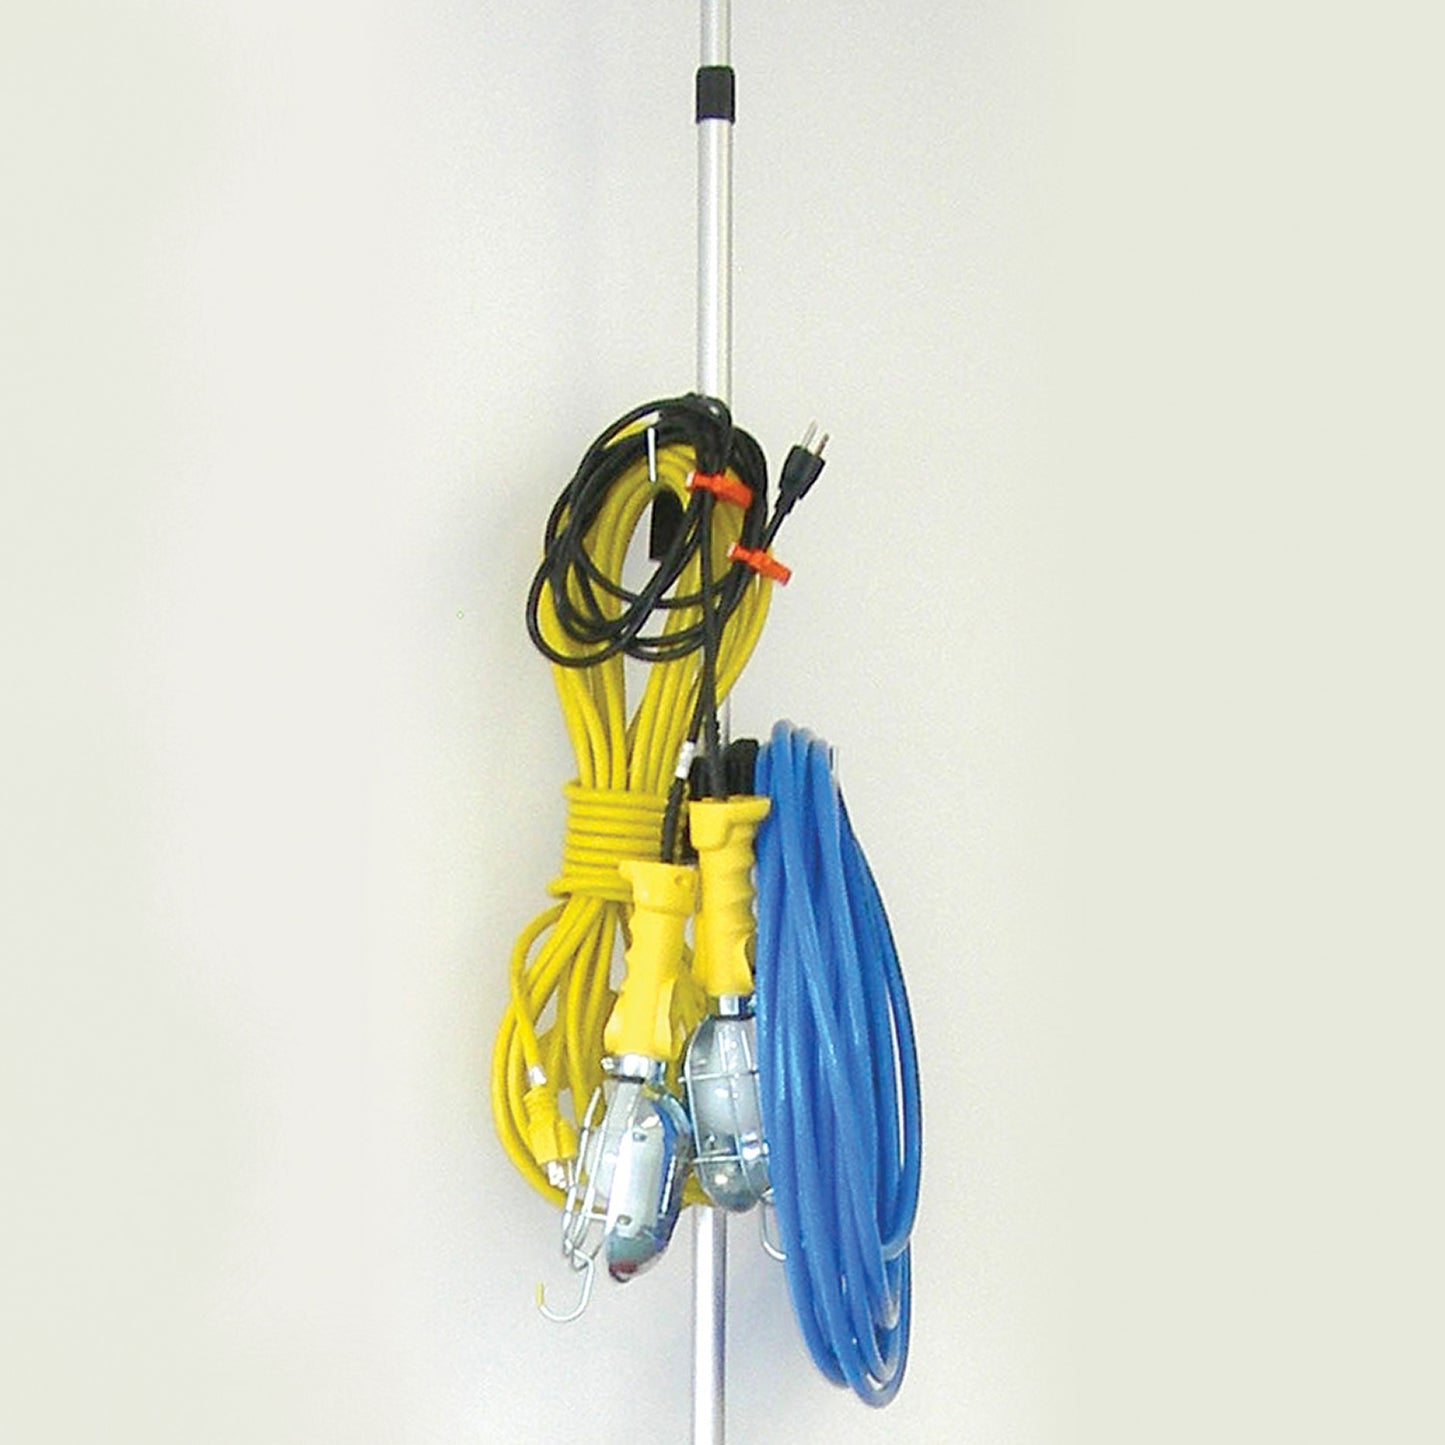 Zipwalll Zip Hook, easily clamps onto any section of the 3.6m, all but the top section of the 3.6m Zippole and all but the bottom section of the 20 foot poles. This hook holds substantial weight and multiple hooks can be used on the one pole.